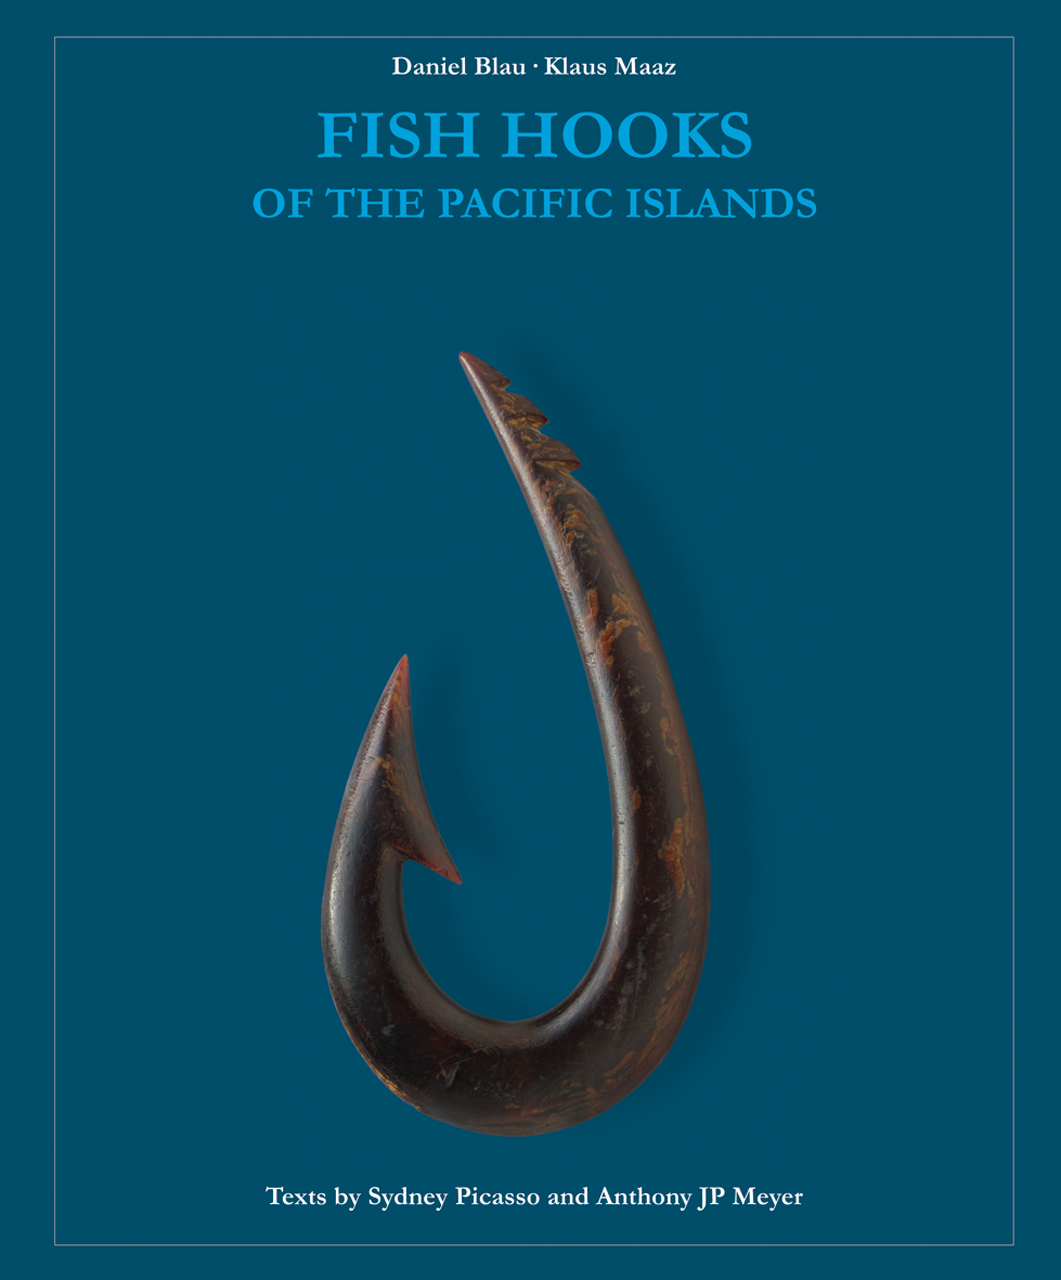 Fish Hooks of the Pacific Islands: A Pictorial Guide to the Fish